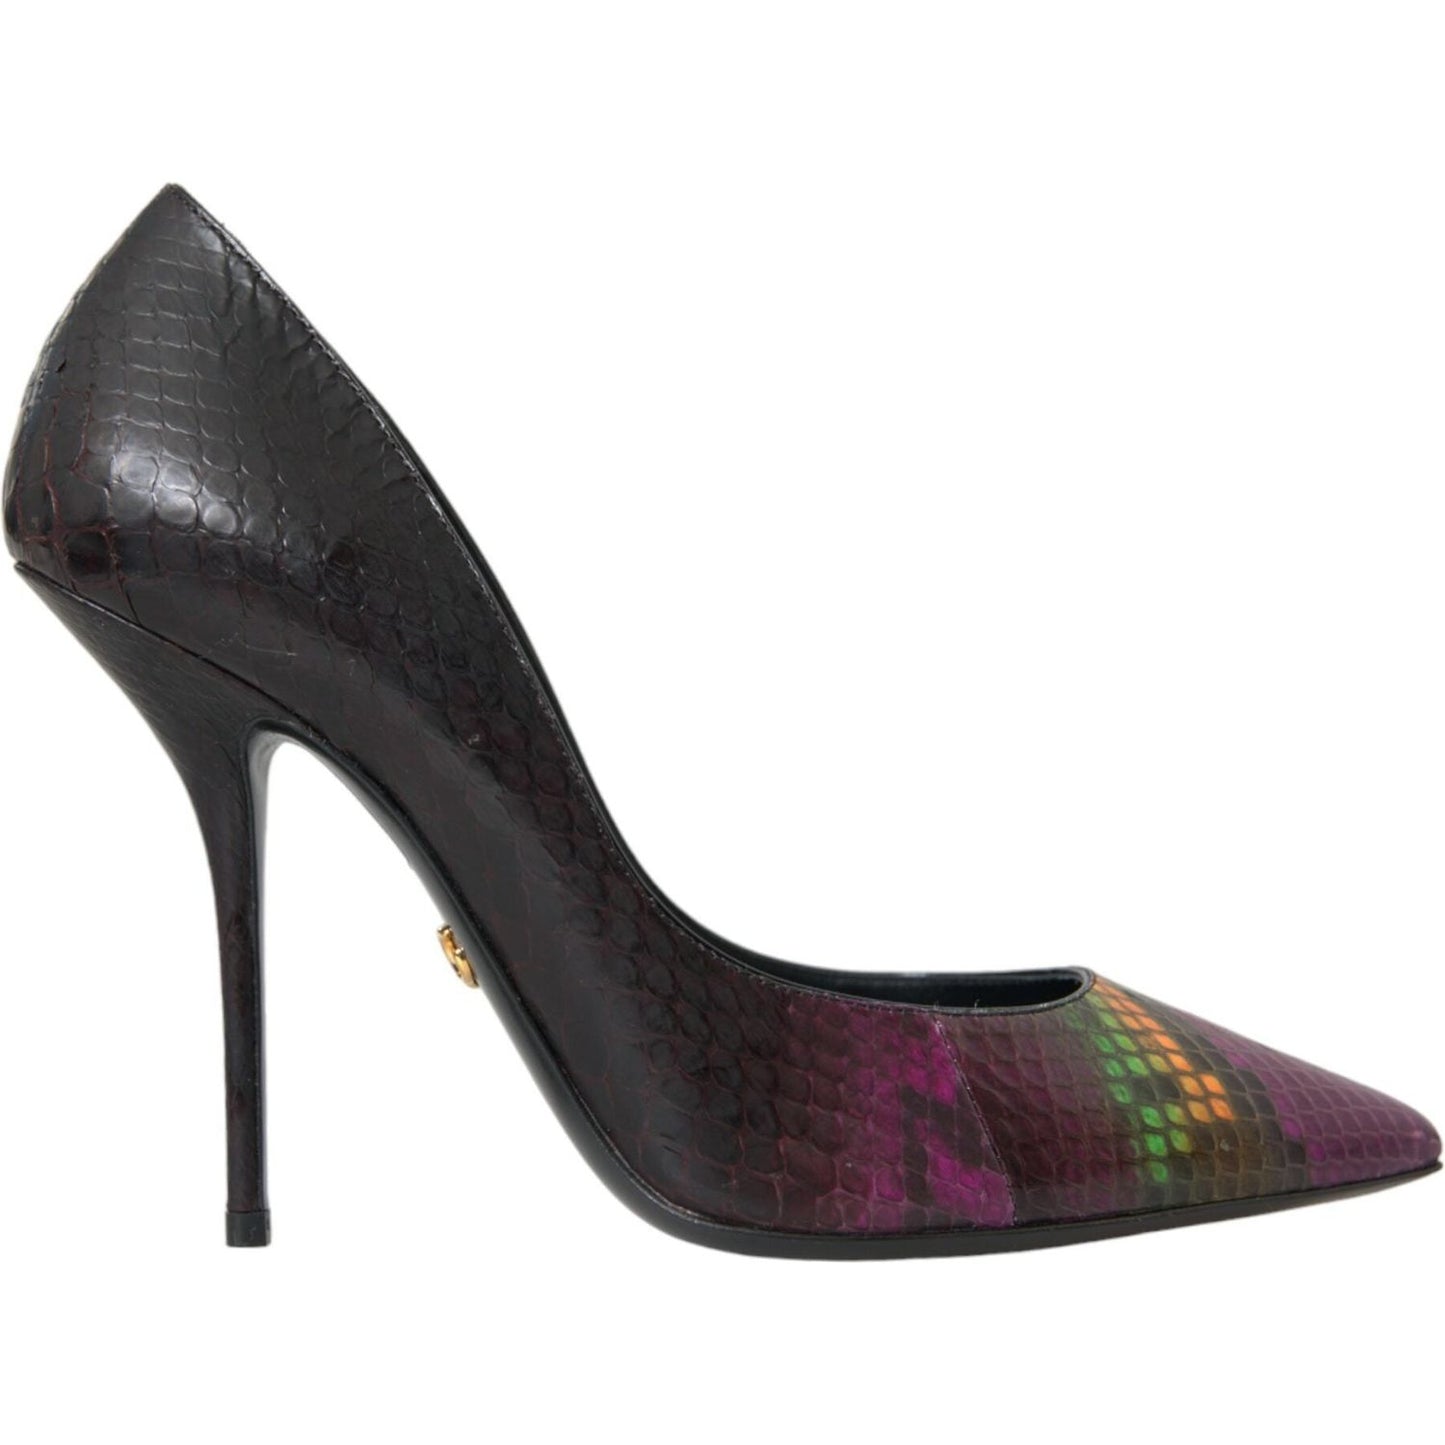 Dolce & Gabbana Multicolor Exotic Leather Heels Pumps Shoes multicolor-exotic-leather-heels-pumps-shoes-1